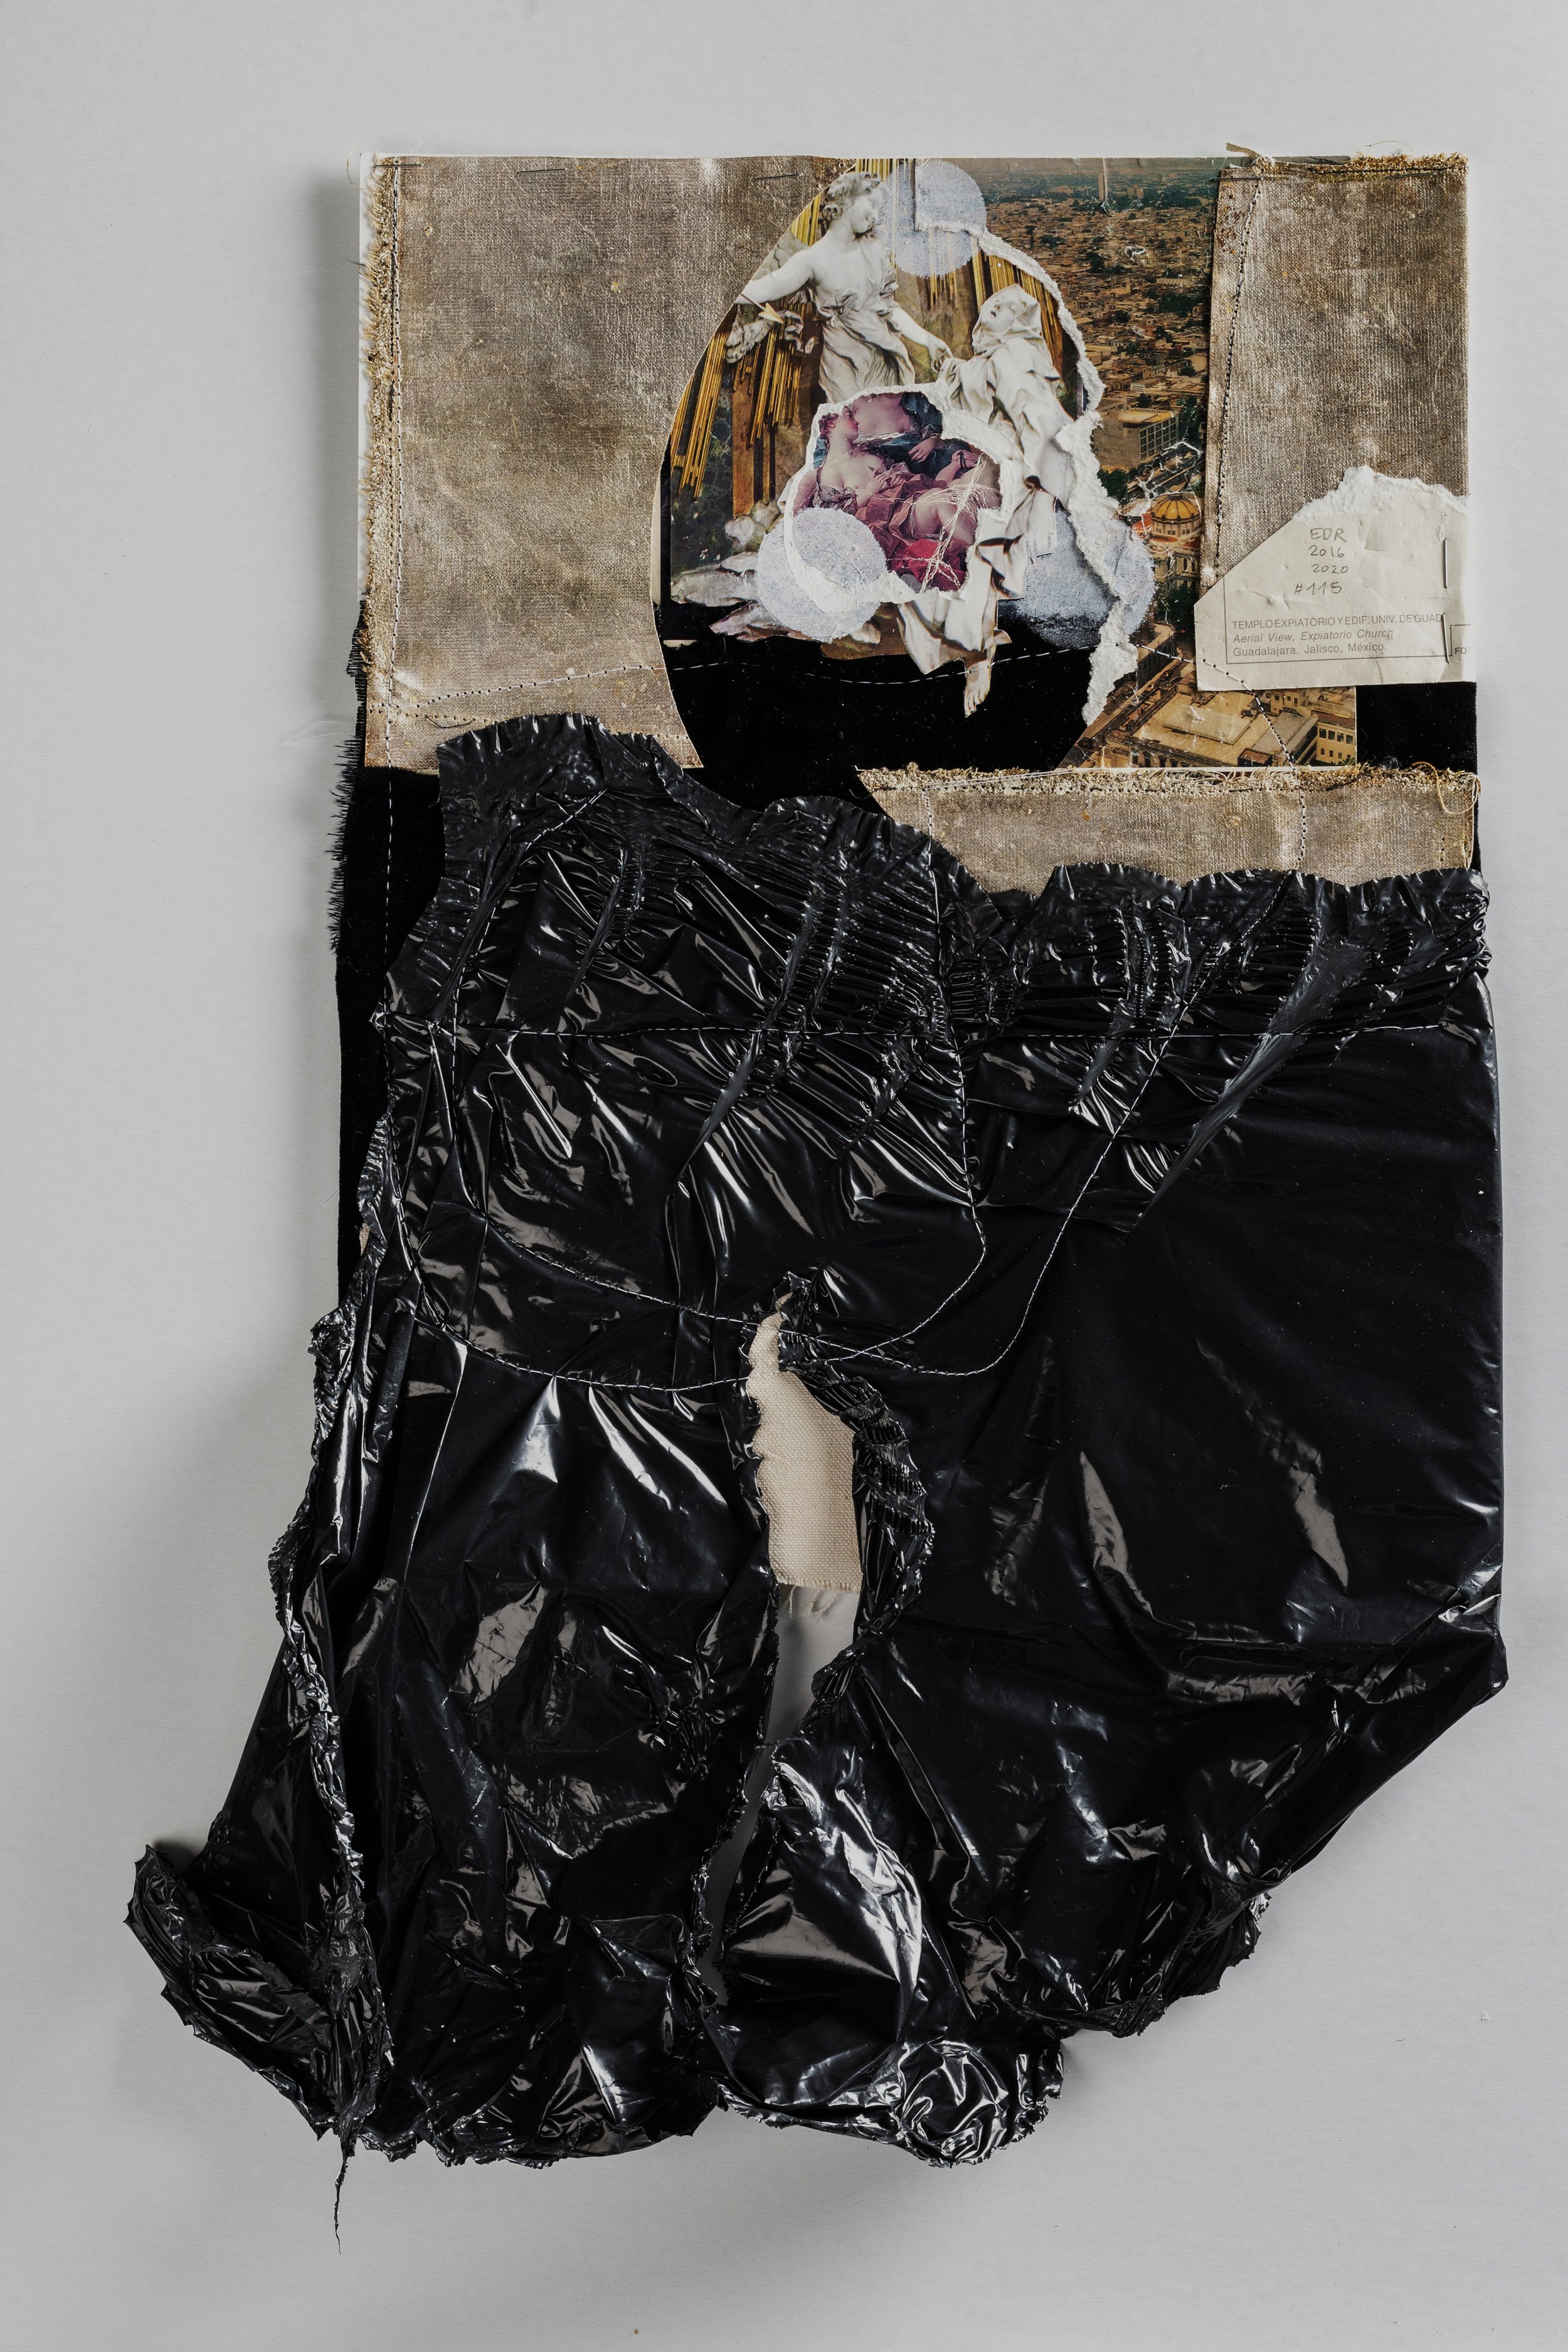  Memory I, #115  2020   Collage with 9/11 and Sandy salvaged fragments of primed linen, silver leaf on linen, stitching, staples, ripped kitchen bags, damaged postcard collage (Aerial view of Guadalajara, Mexico, Bernini, Ecstasy of Saint Teresa, 164